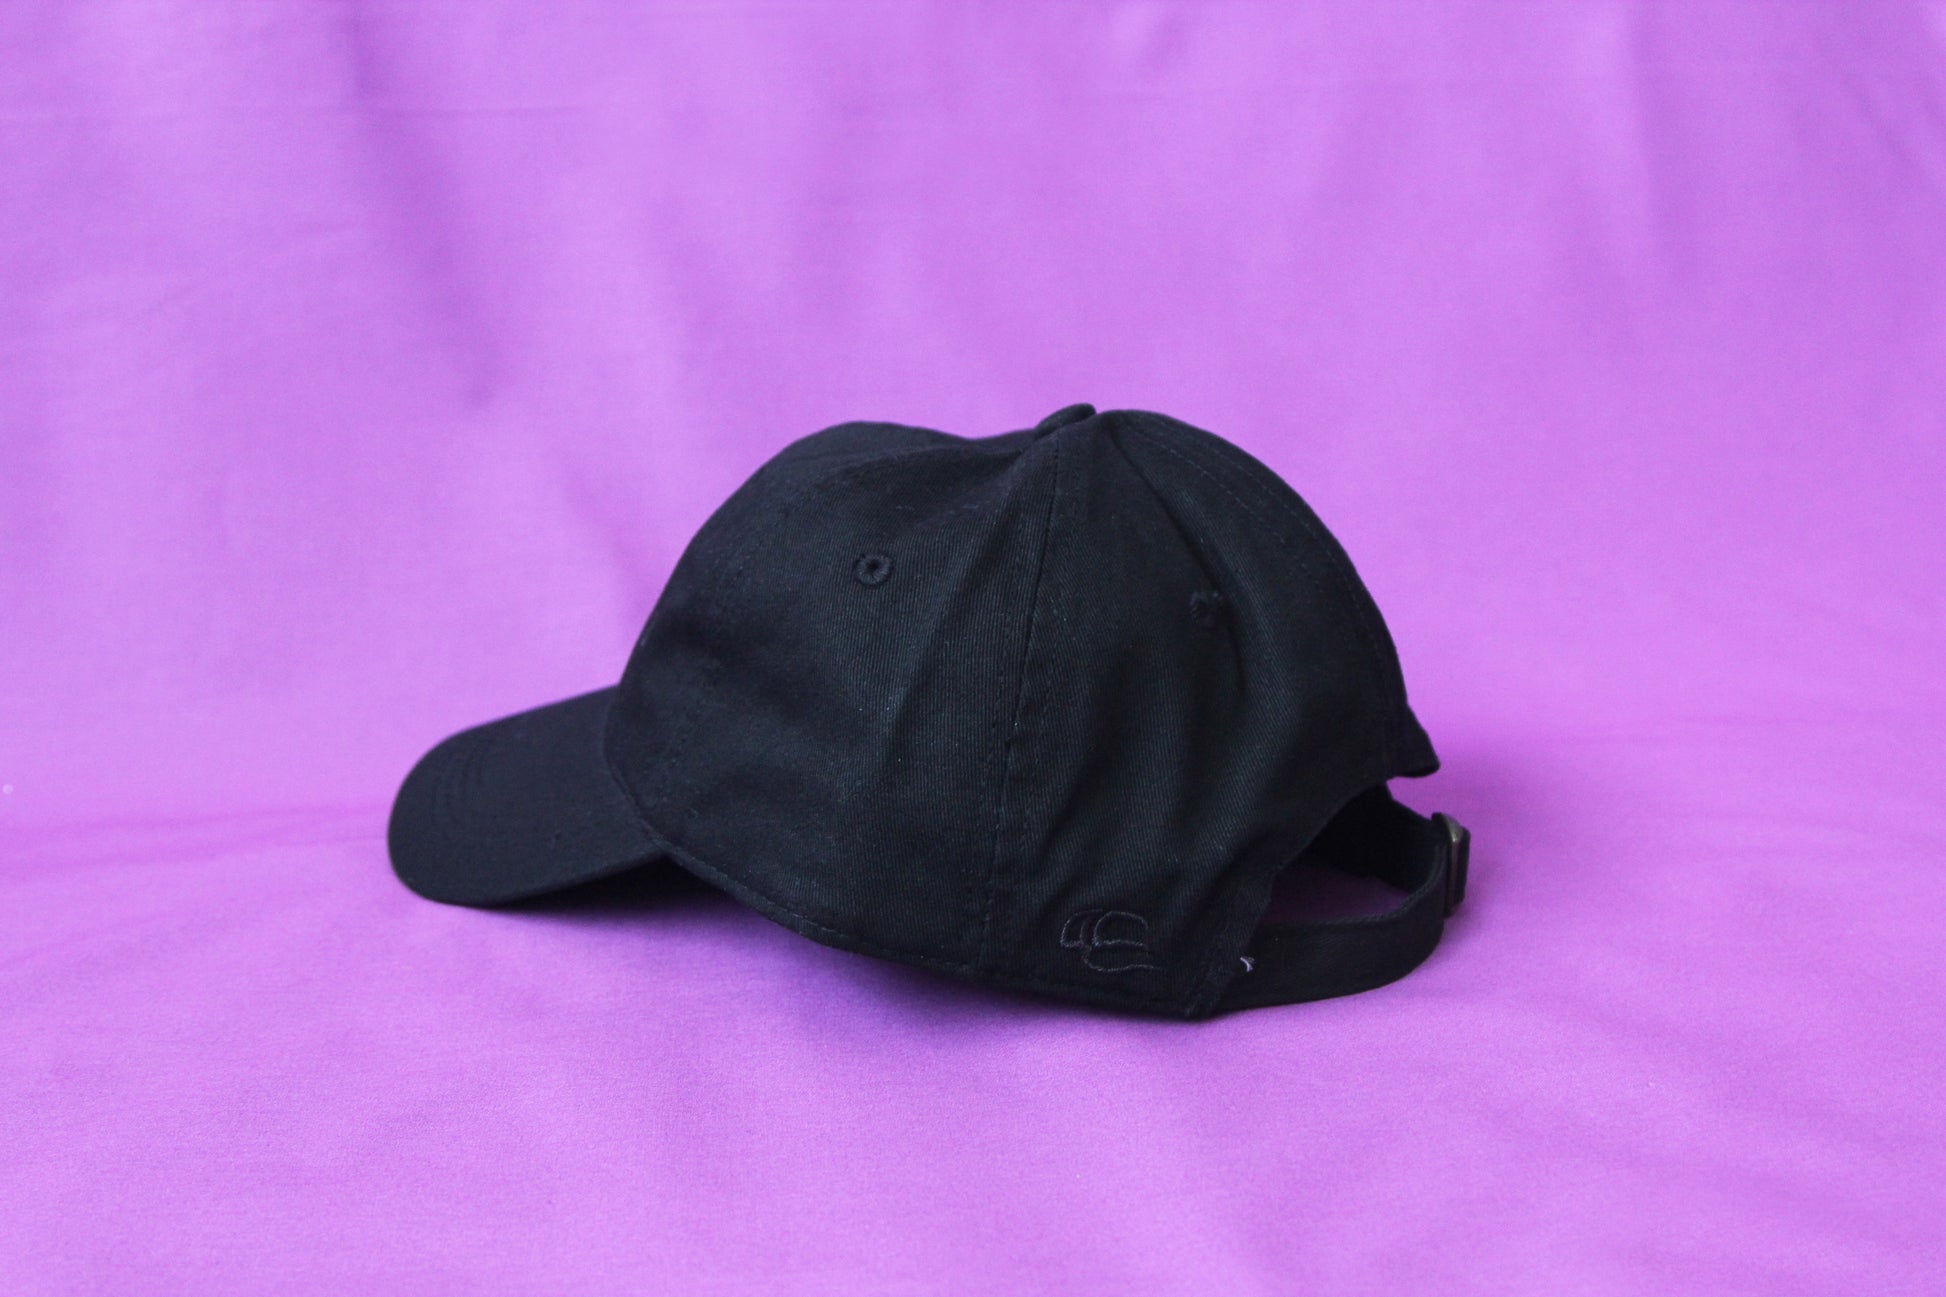 A photo of the back of a black dad hat with an adjustable buckle strap.